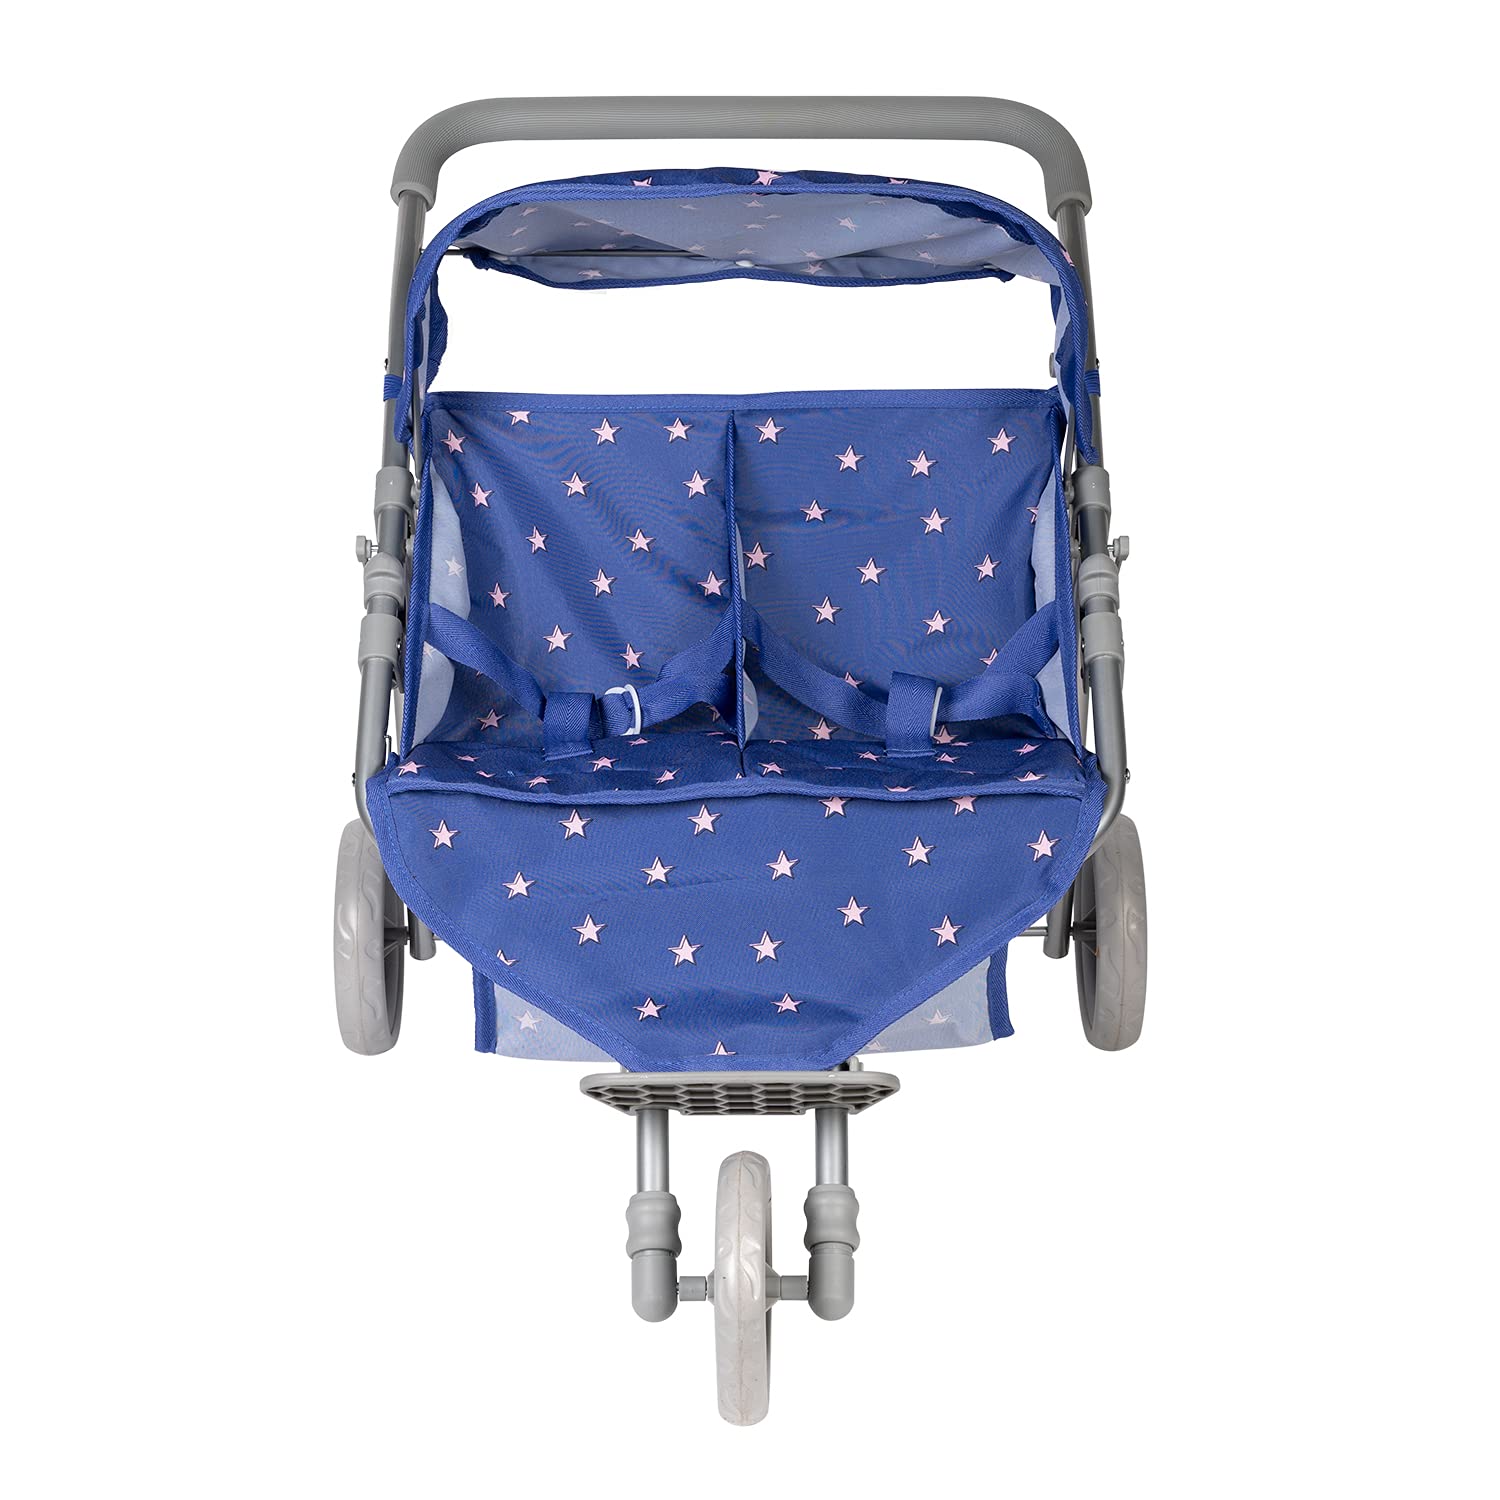 ADORA Baby Doll Stroller, Starry Night Stroller Twin Jogger Stroller, Fits Dolls Up to 16 inches